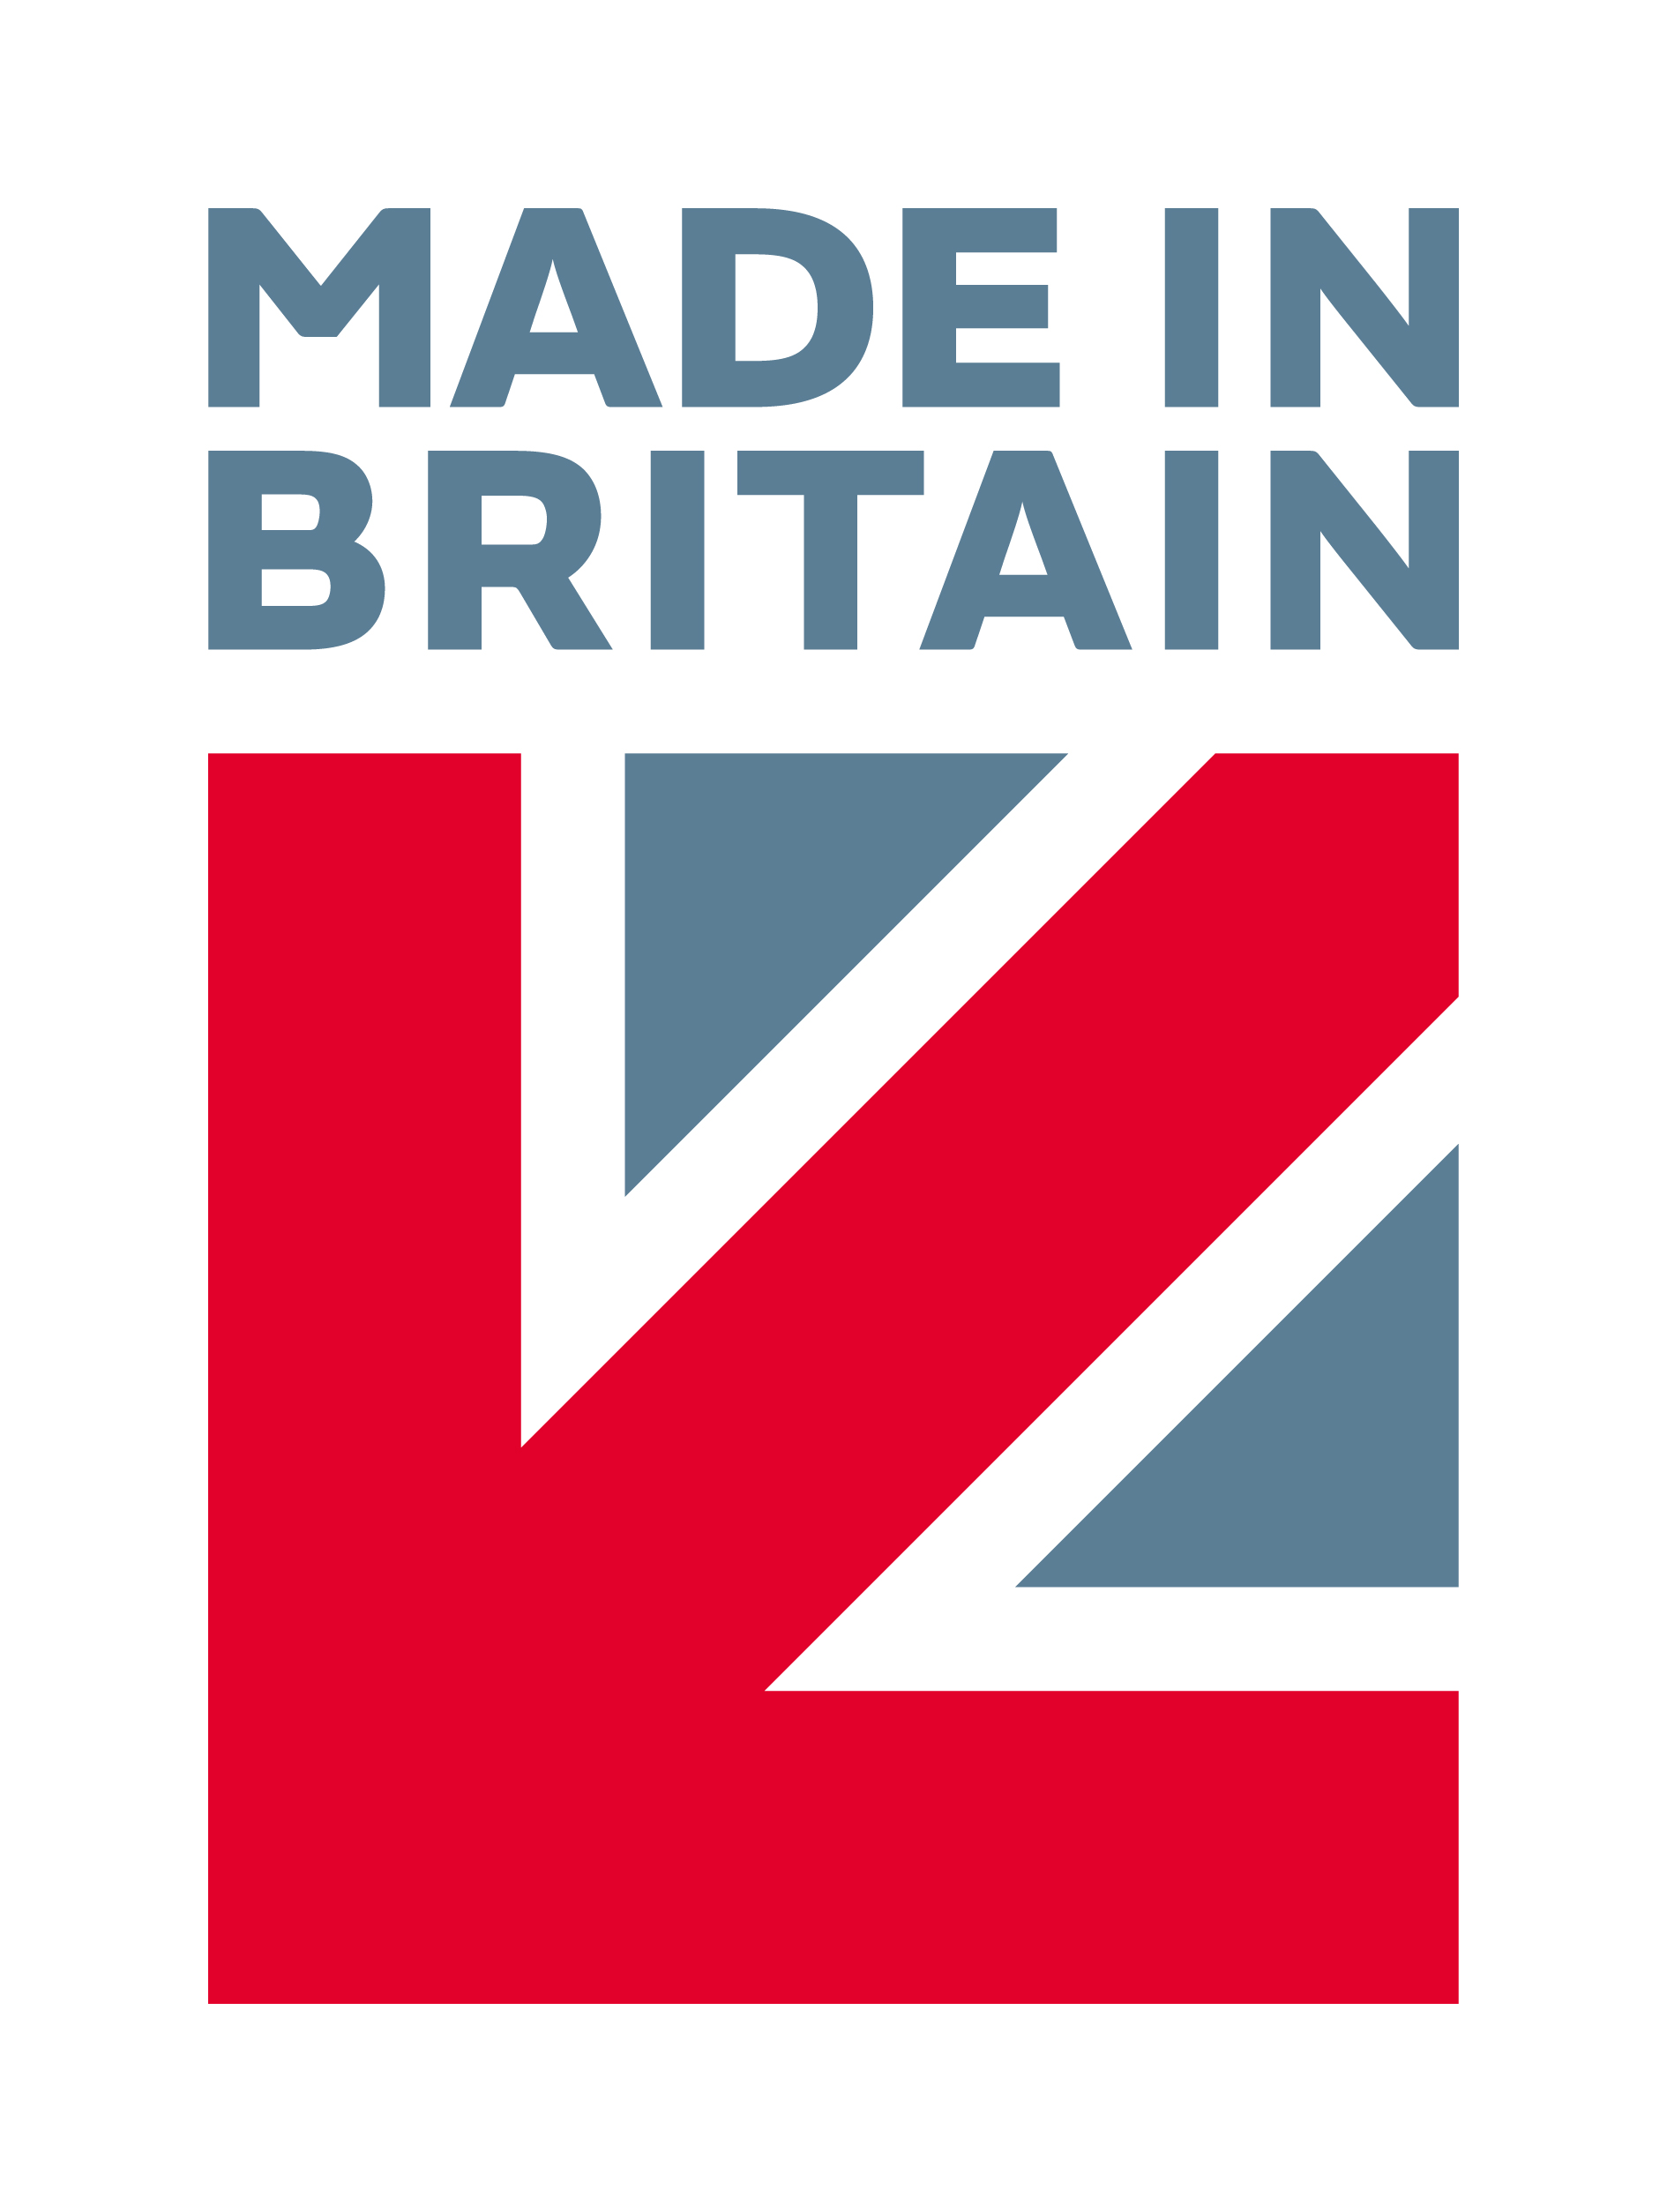 More info on Made in Britain